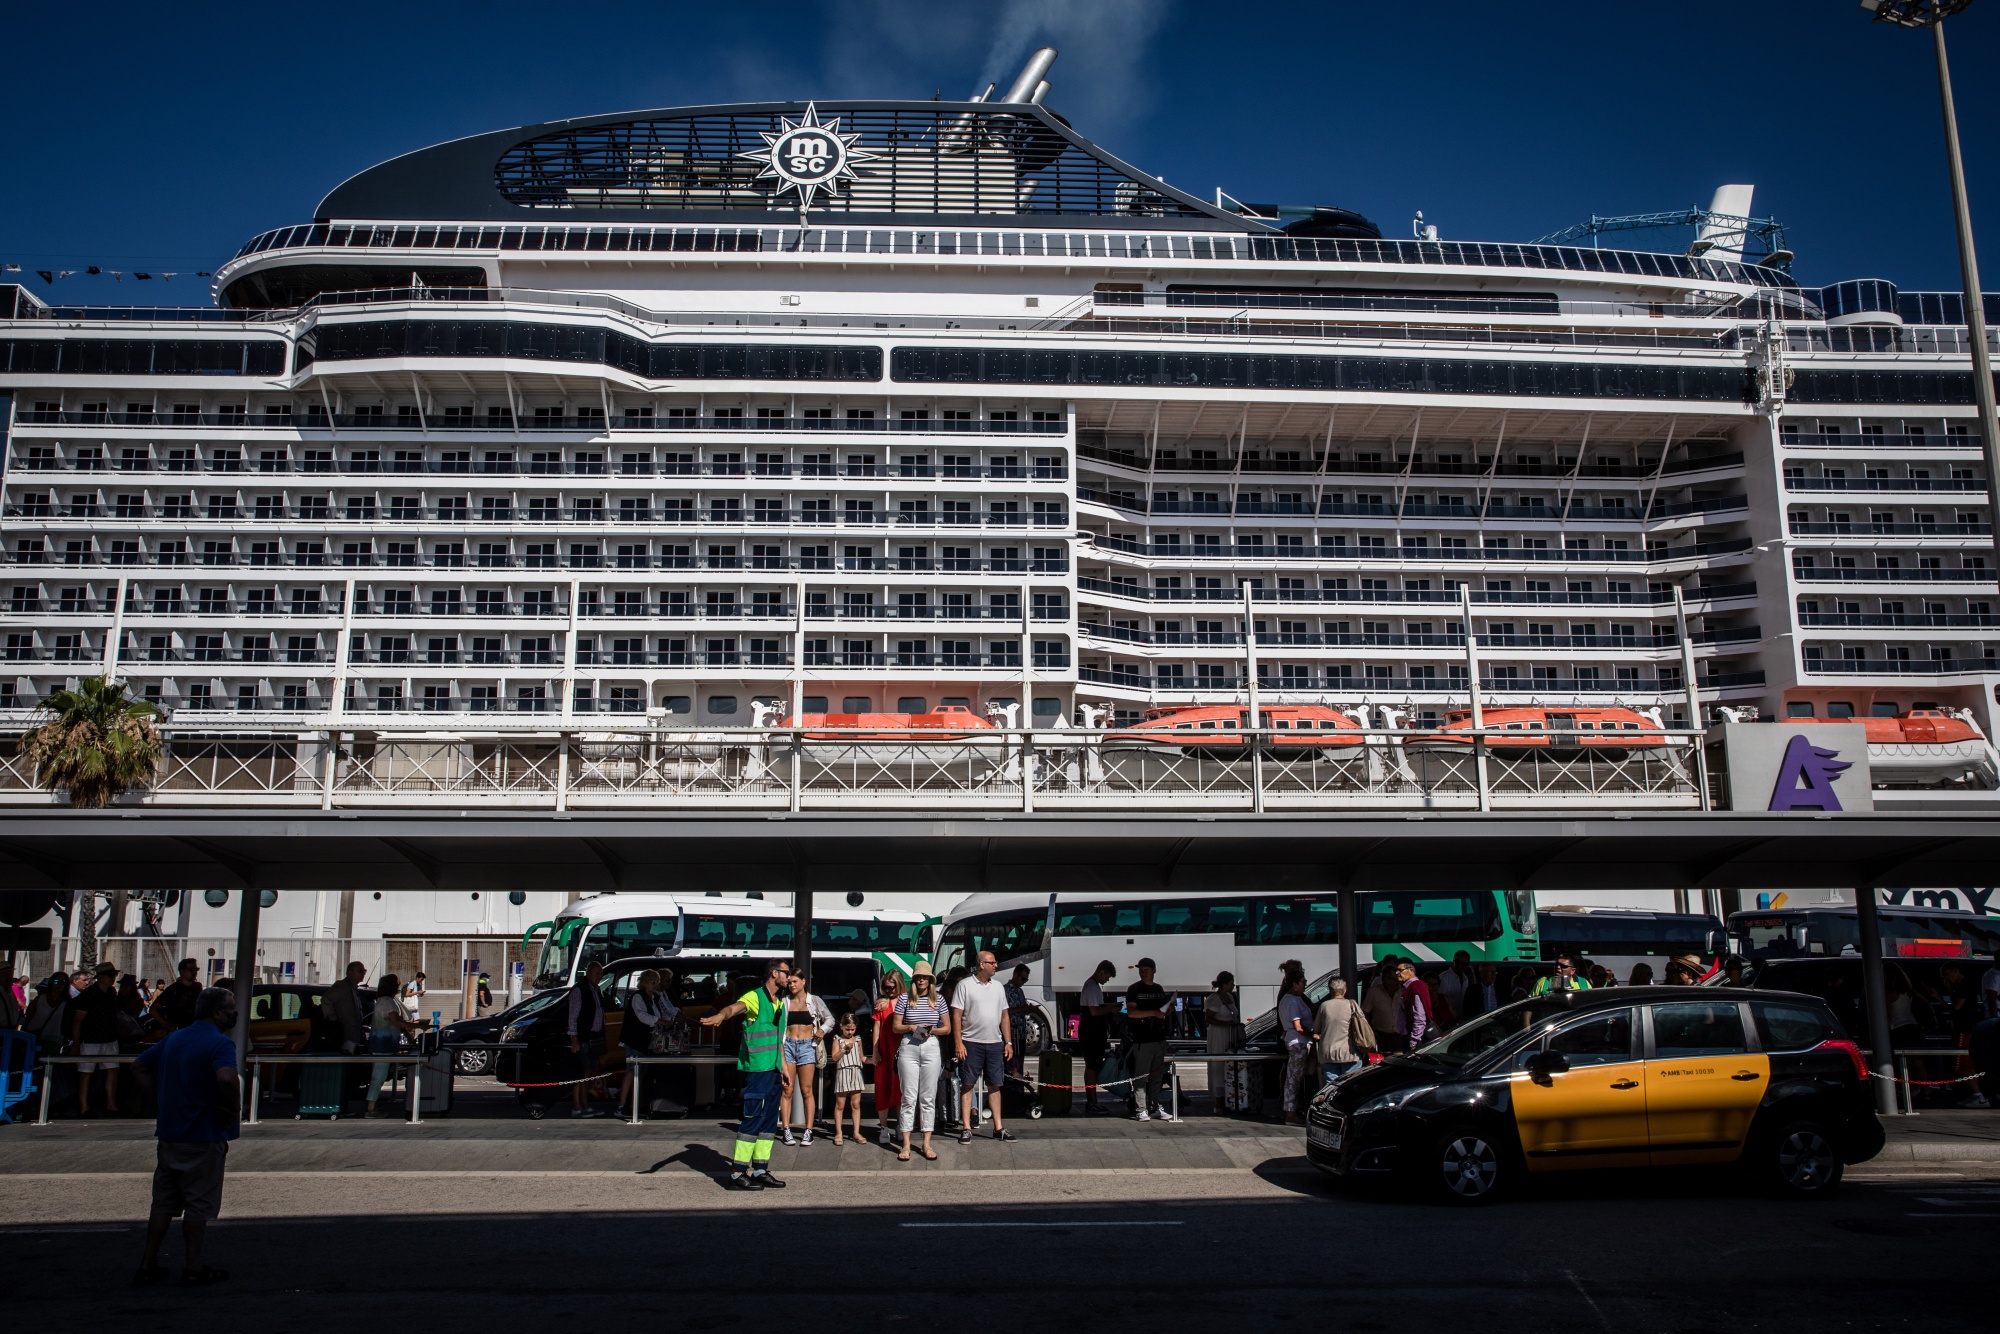 Tourists queue for onward travel at a cruise terminal in Barcelona.